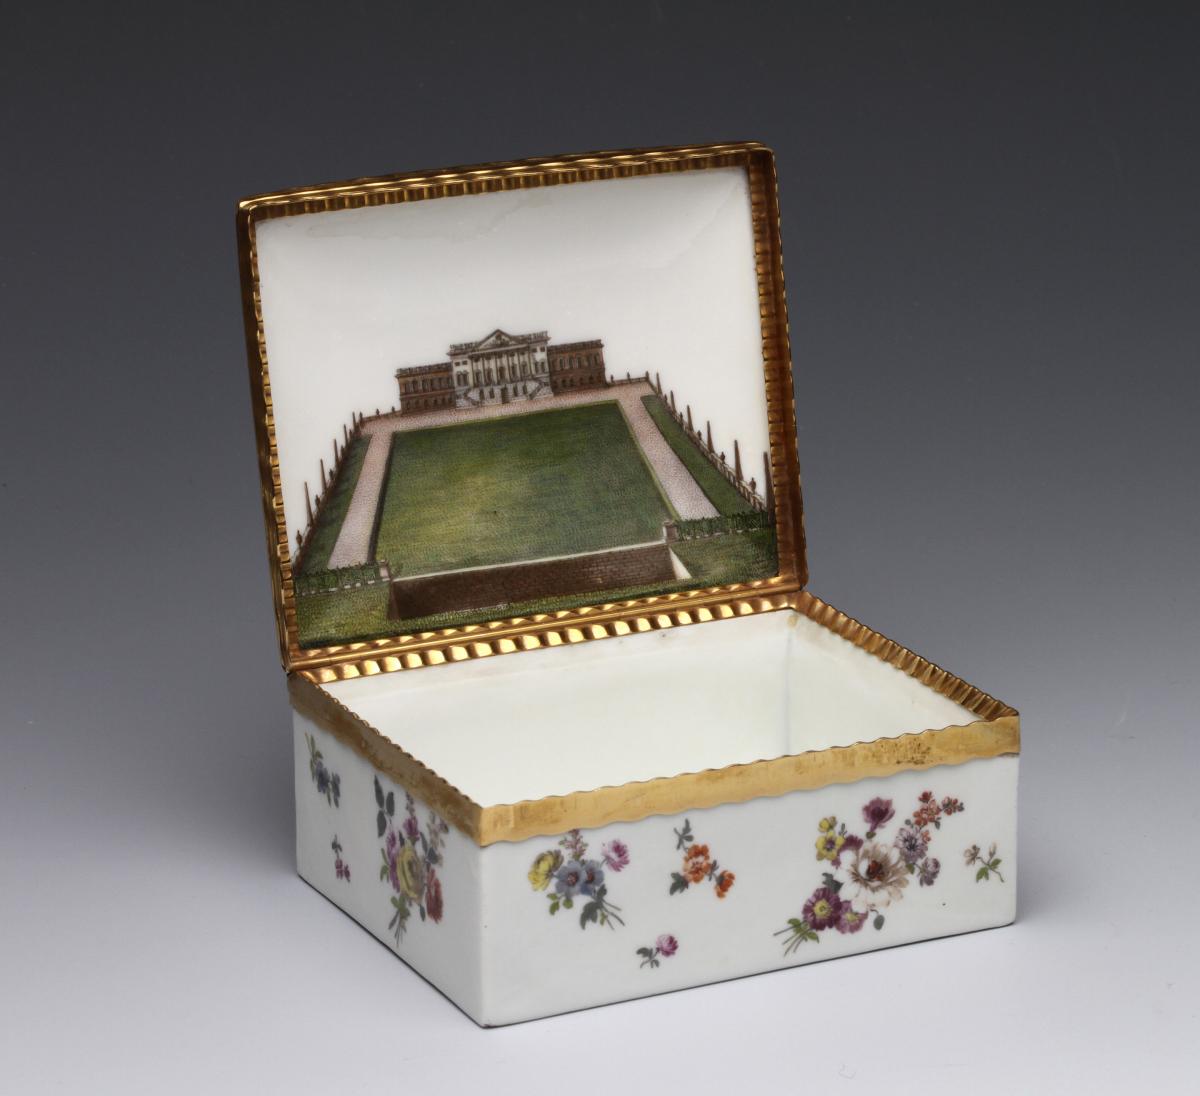 A Meissen gold-mounted table snuff box painted with a view of Wanstead House 1750